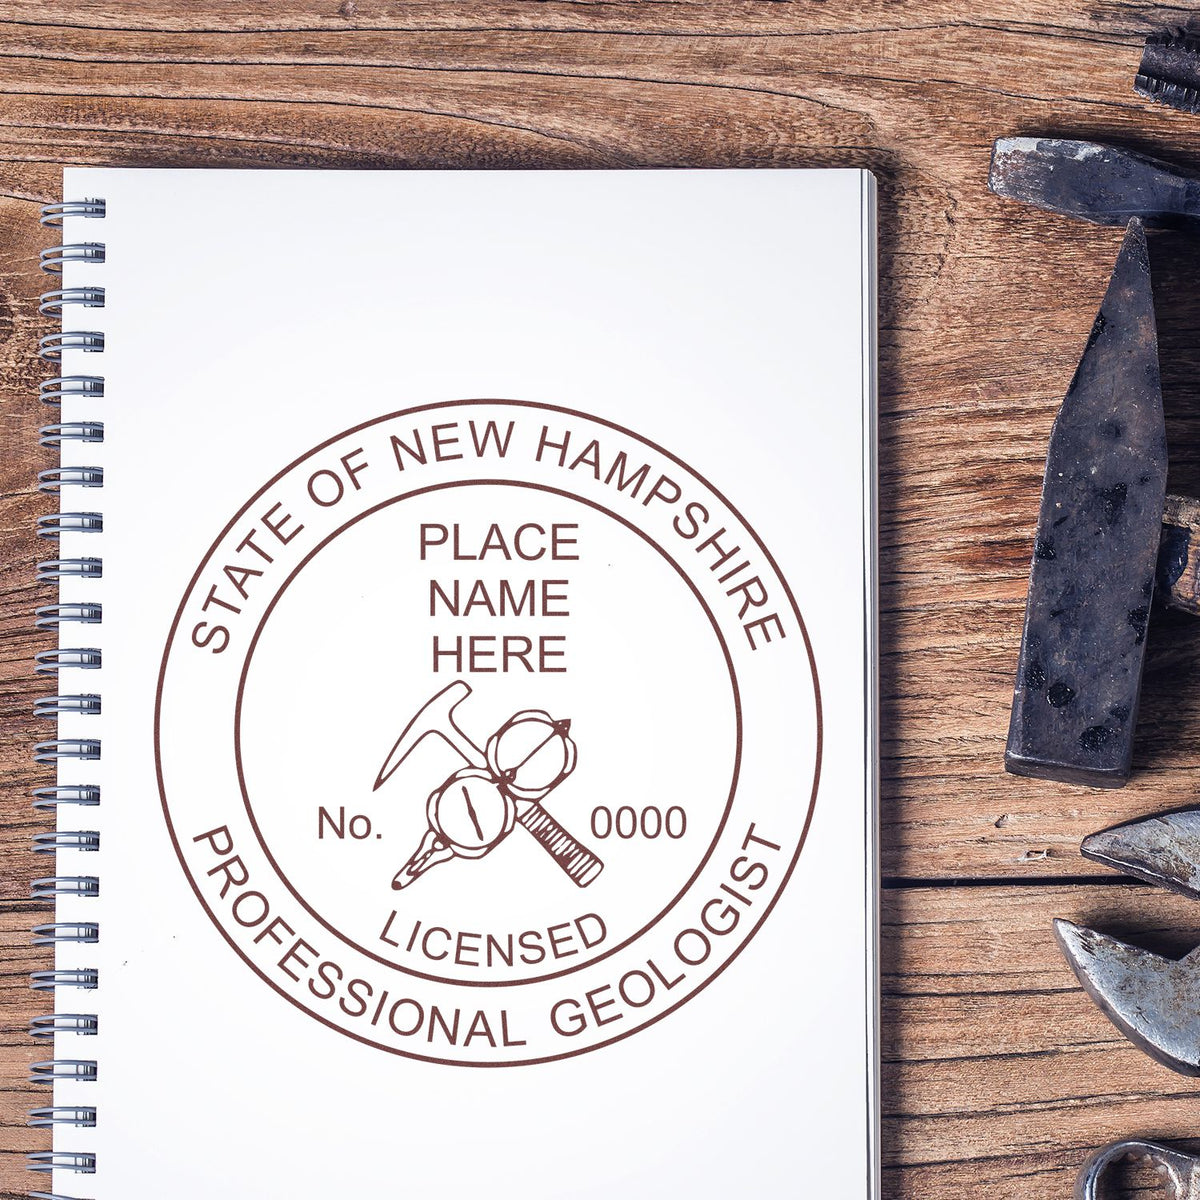 The Self-Inking New Hampshire Geologist Stamp stamp impression comes to life with a crisp, detailed image stamped on paper - showcasing true professional quality.